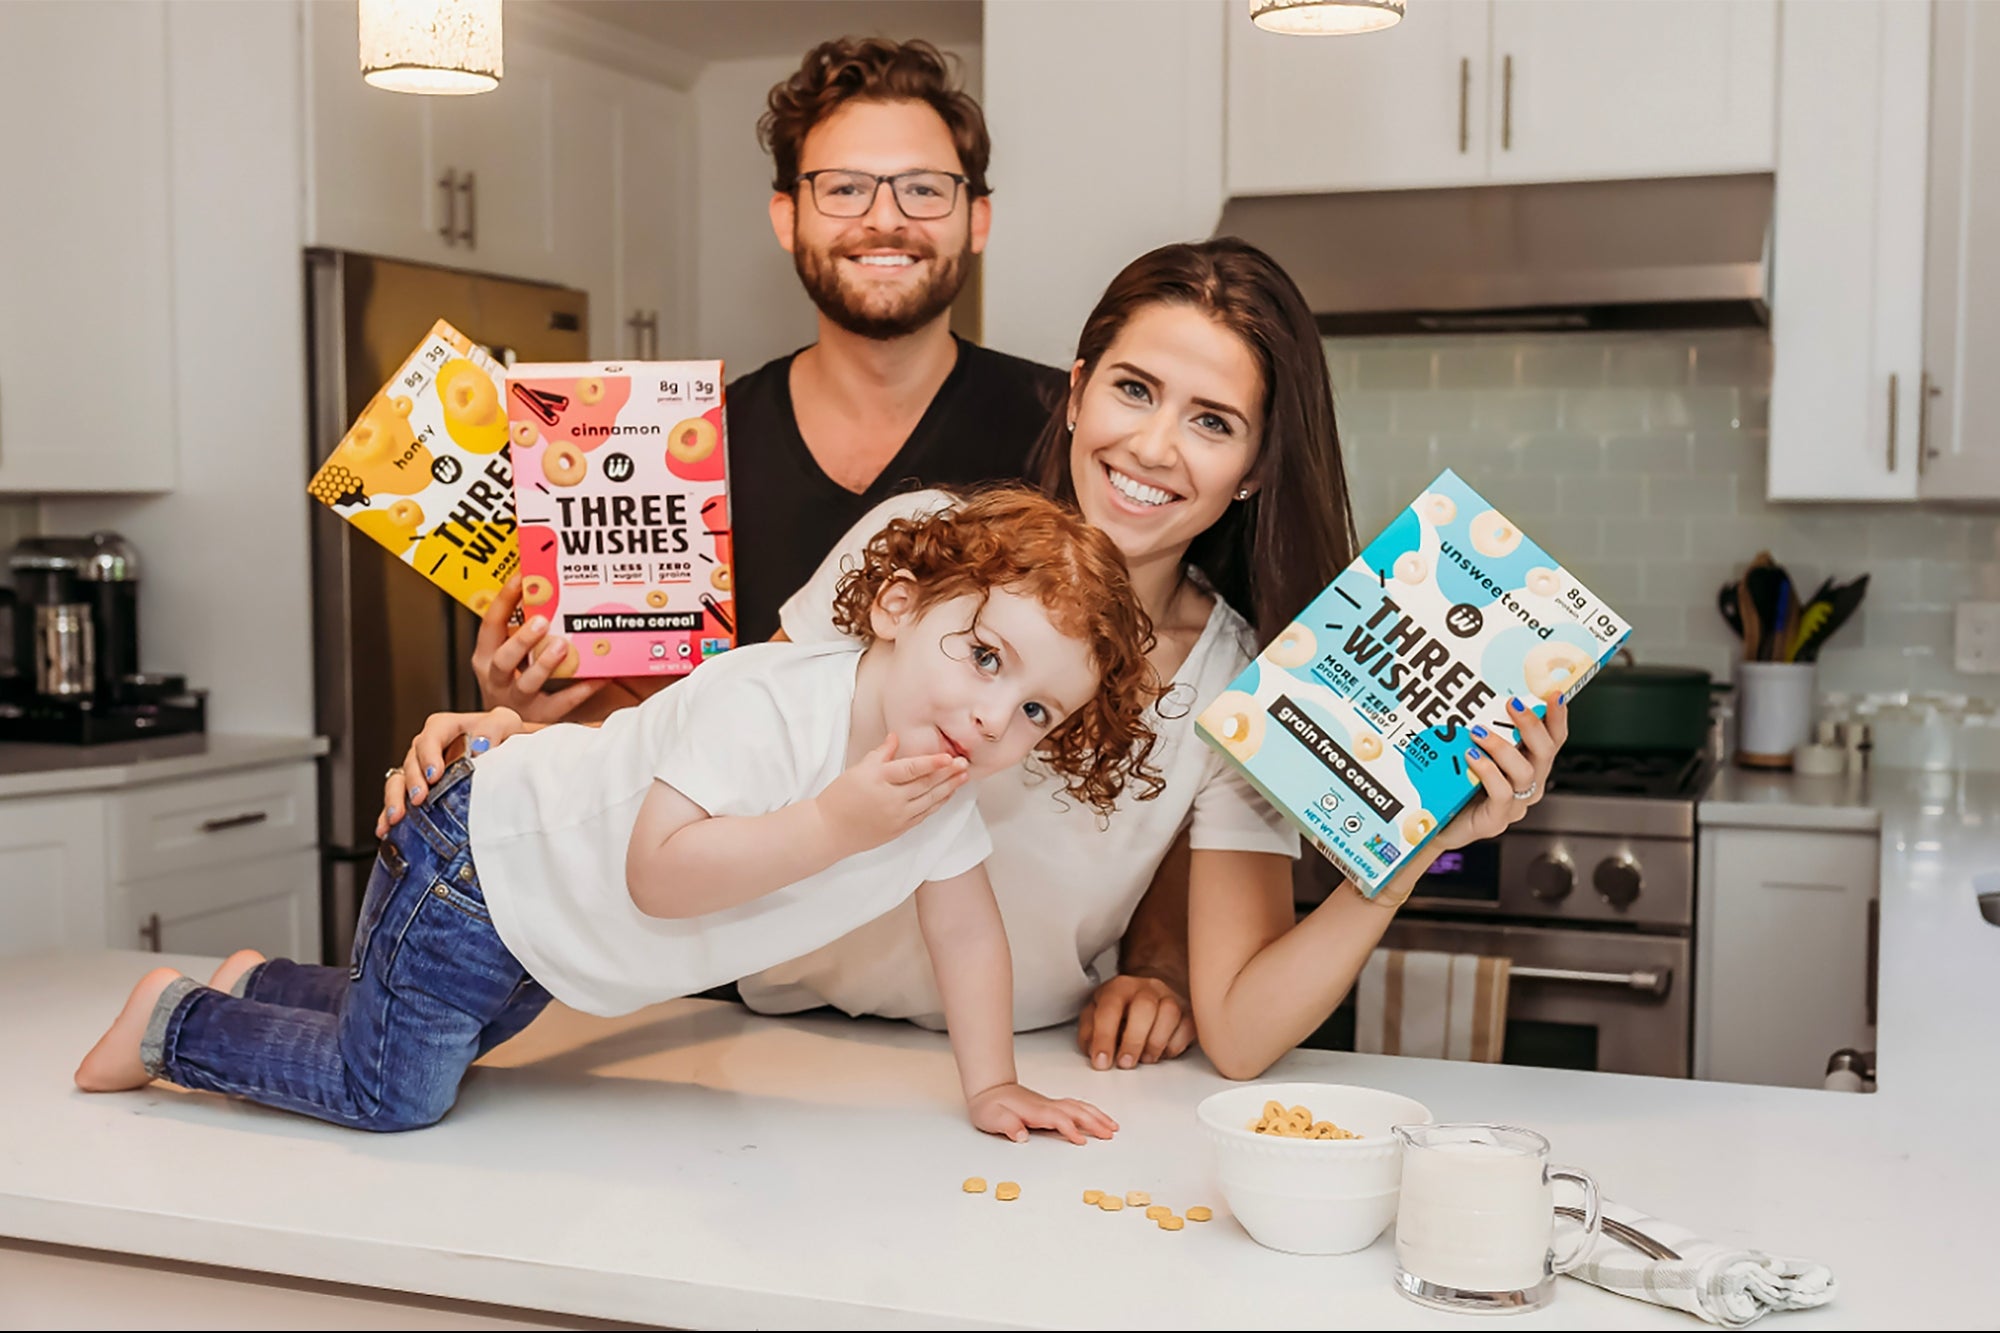 In Just One Year, This Cereal Creator Grew a Multi-Million Dollar Brand That